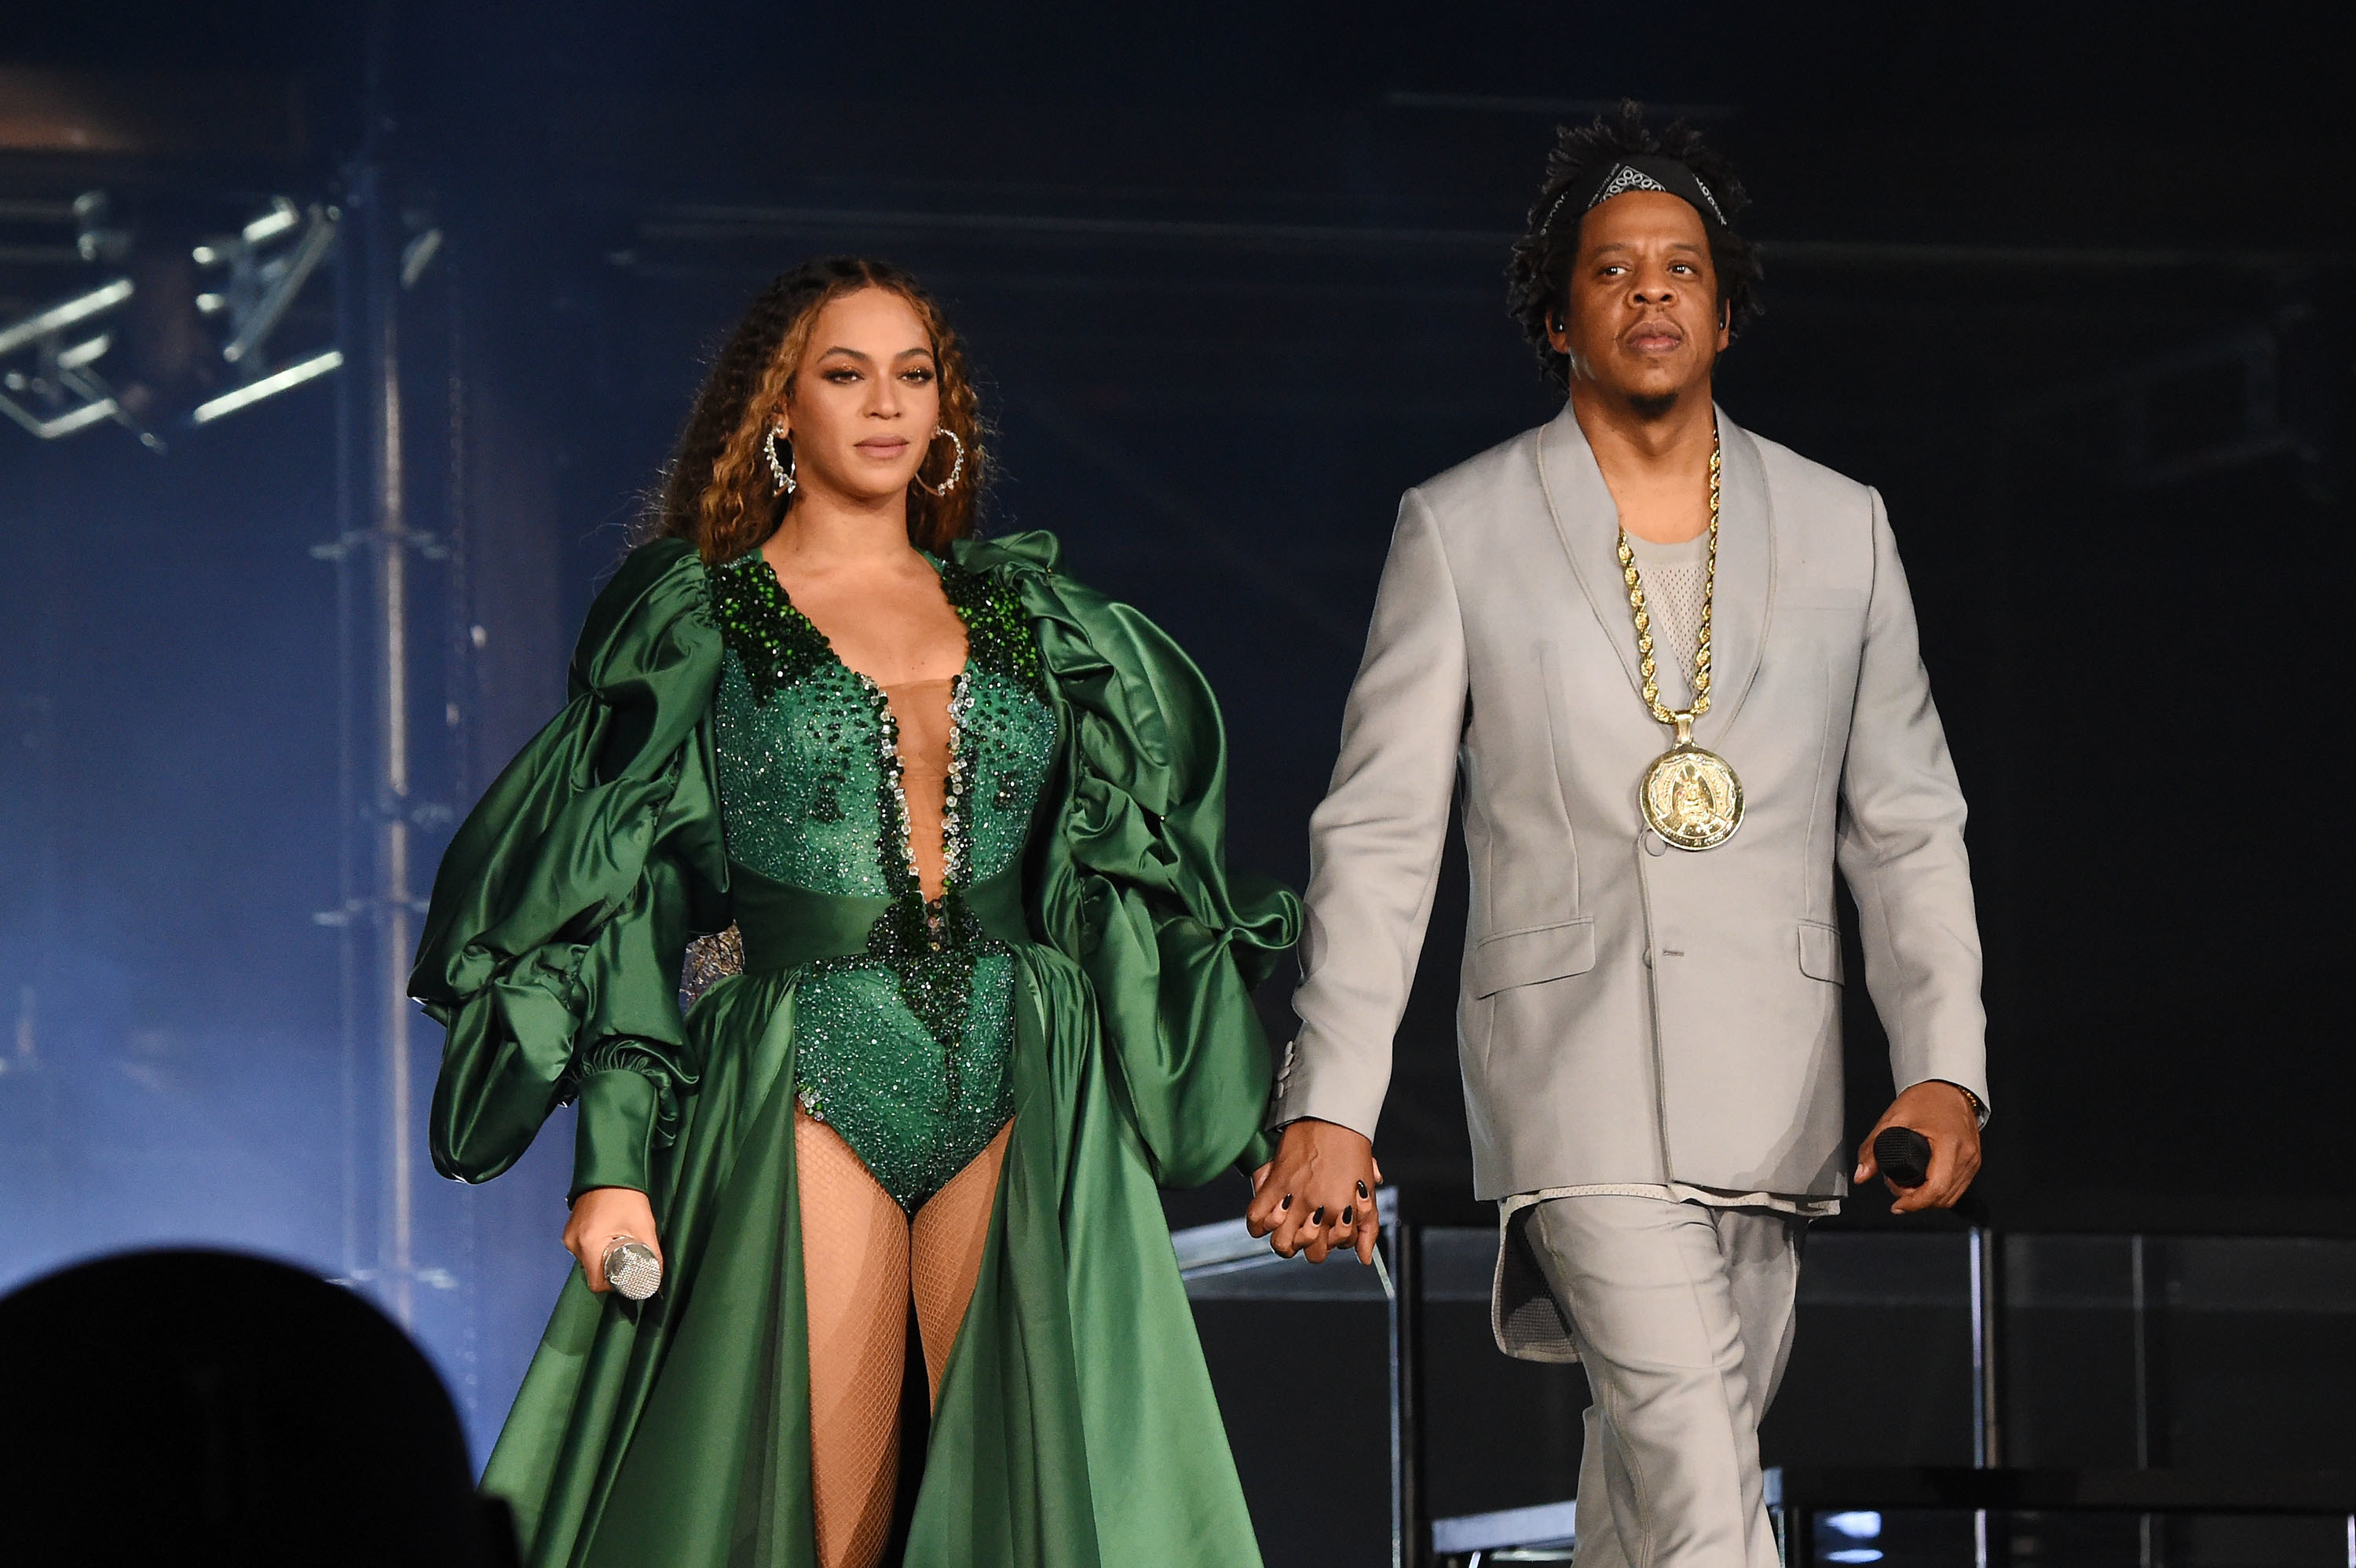 Beyoncé and Jay-Z on stage